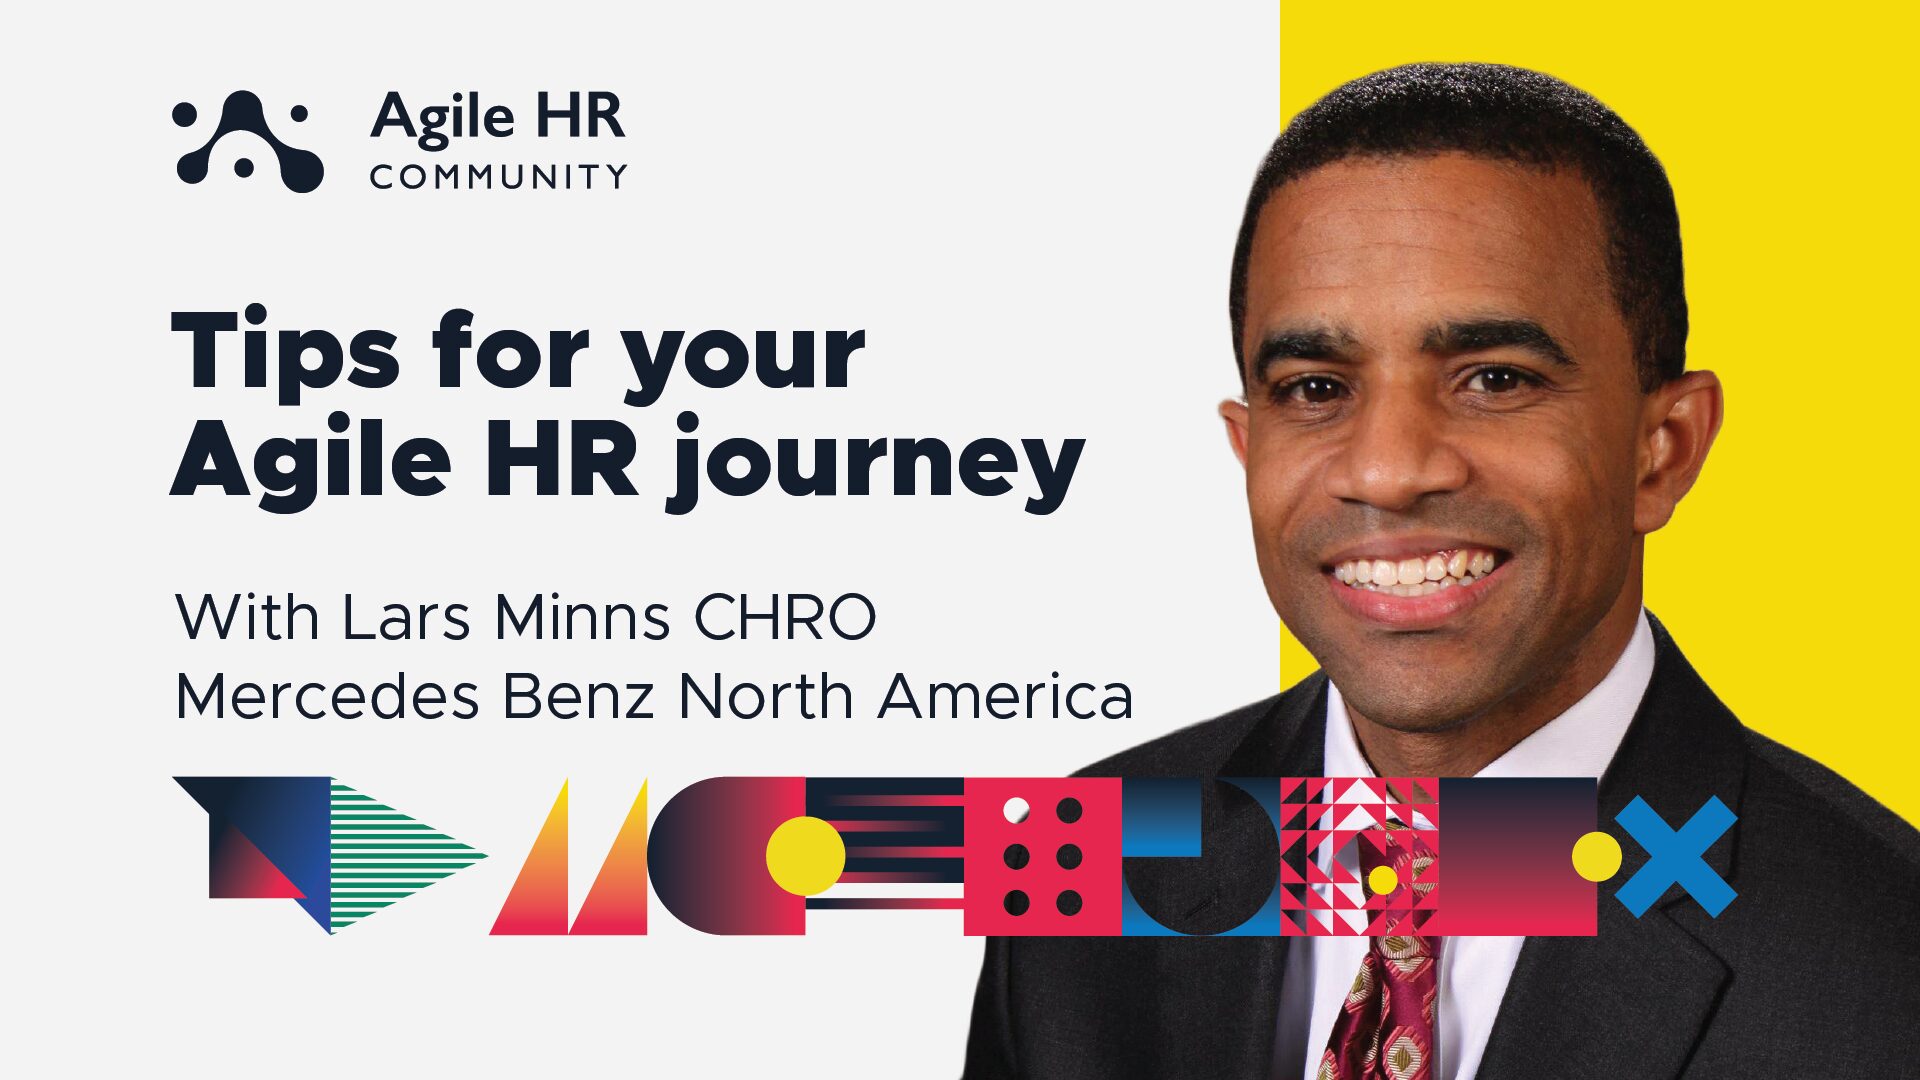 Agile HR Tips Banner - Featuring Lars Minns on a nordic style background